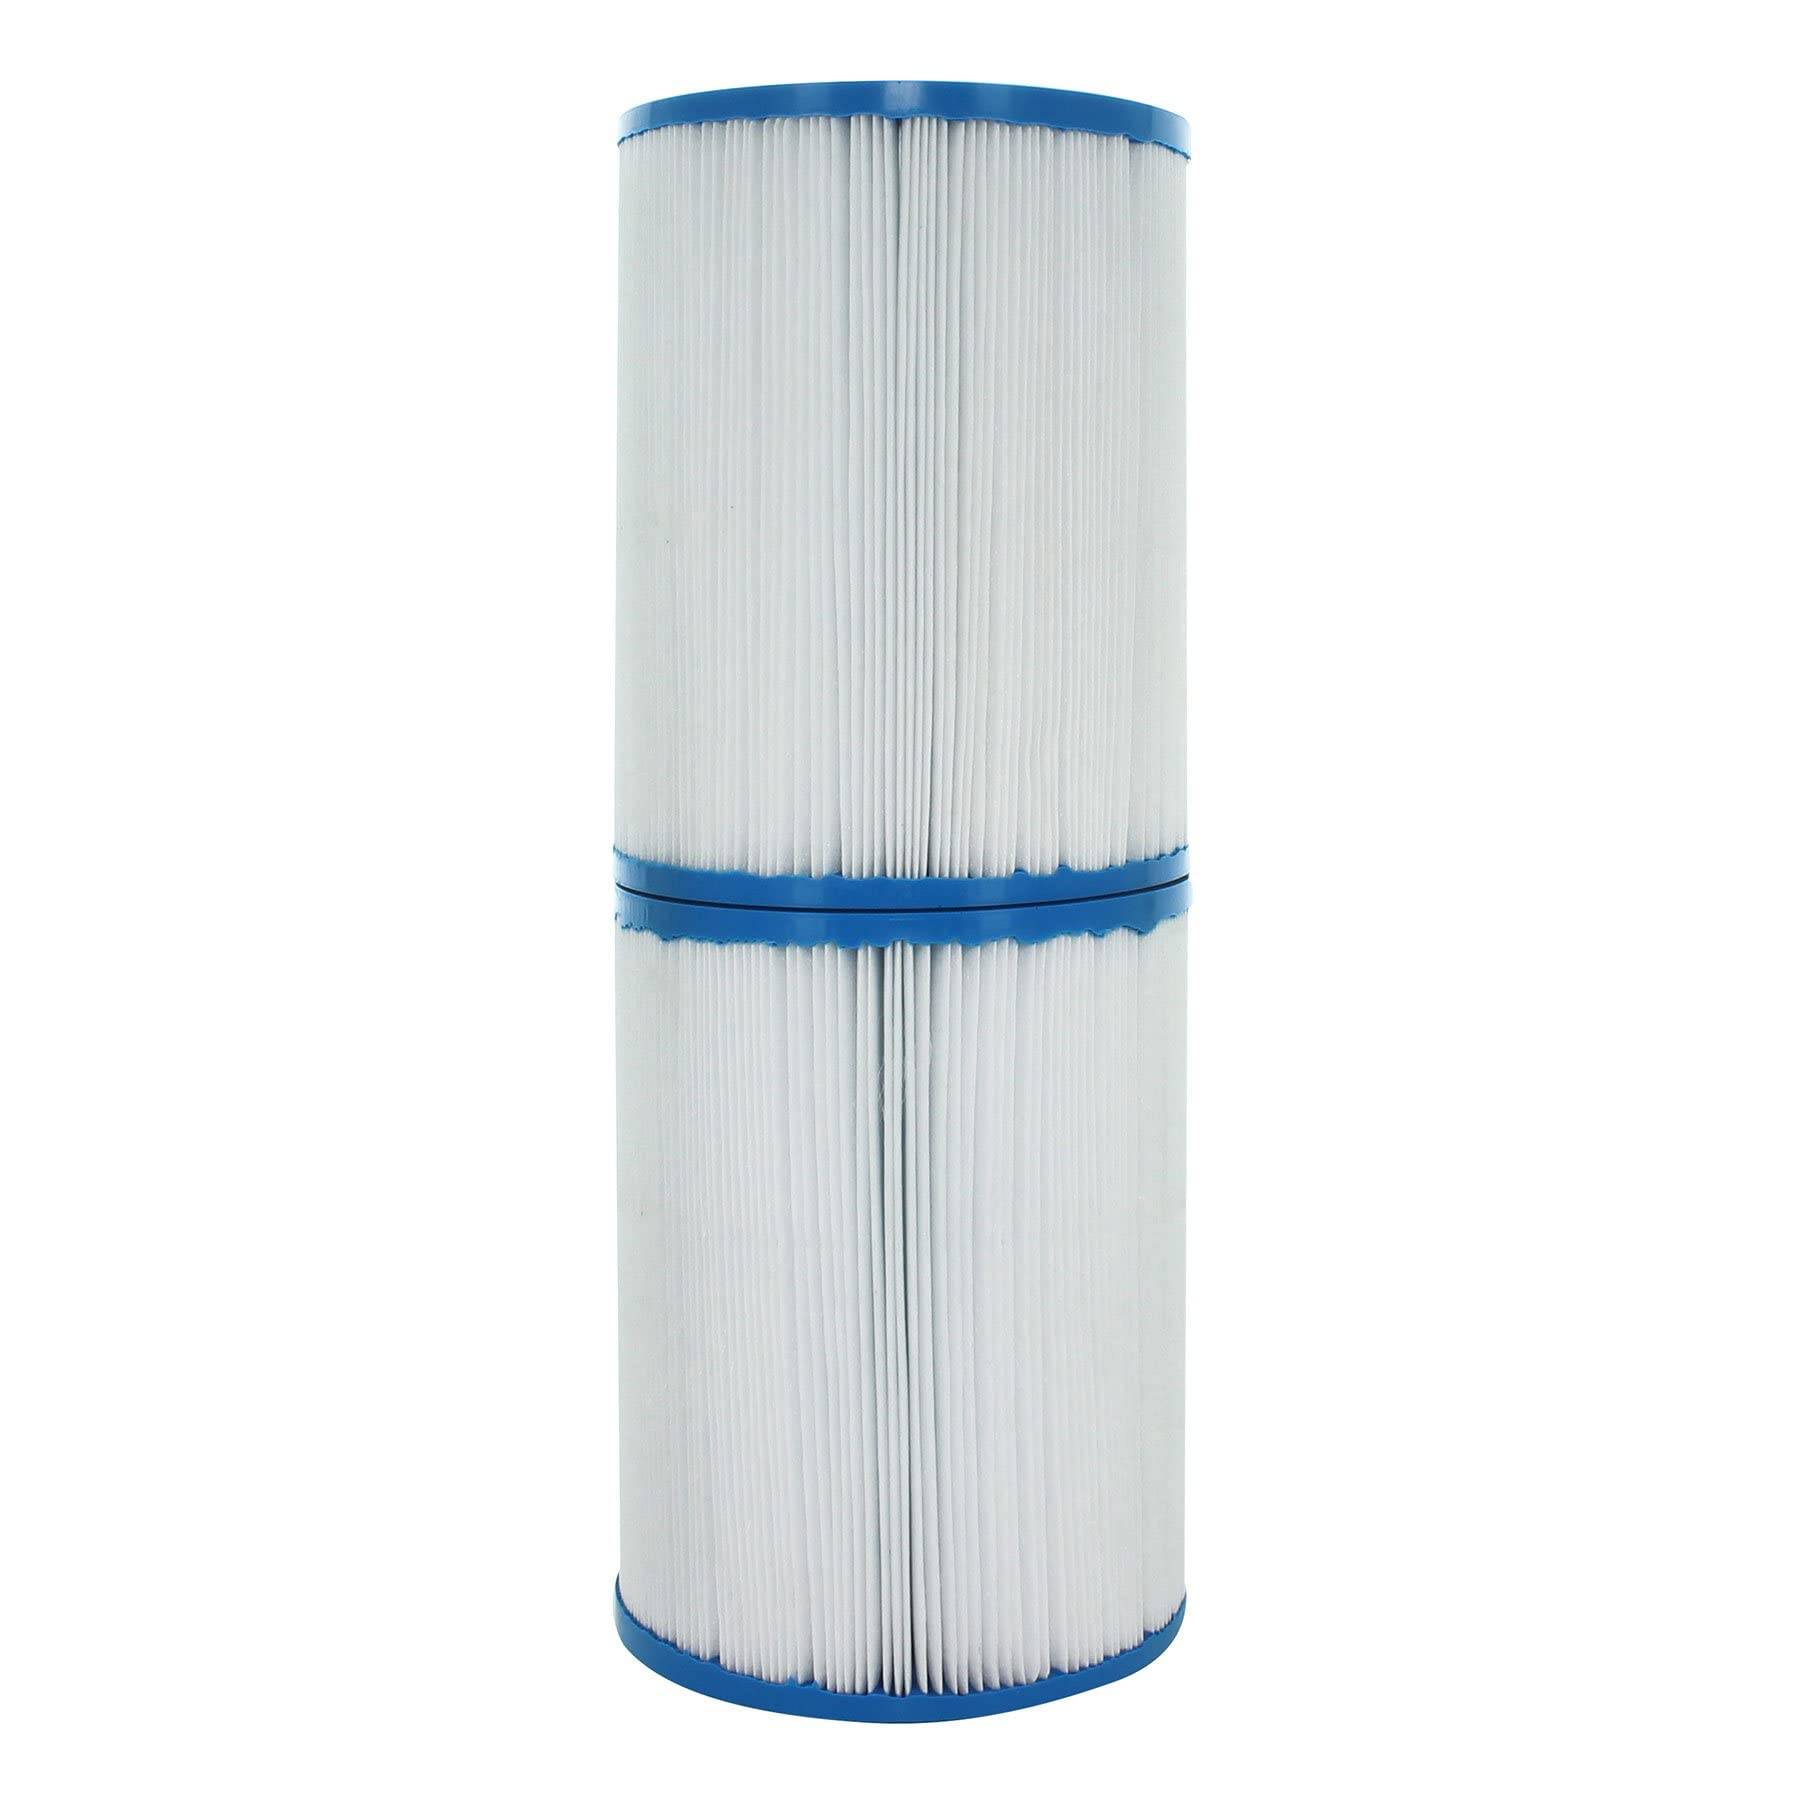 Filters Fast® Replacement For Rainbow 817-5010 Pool & Spa Filter Cartridge